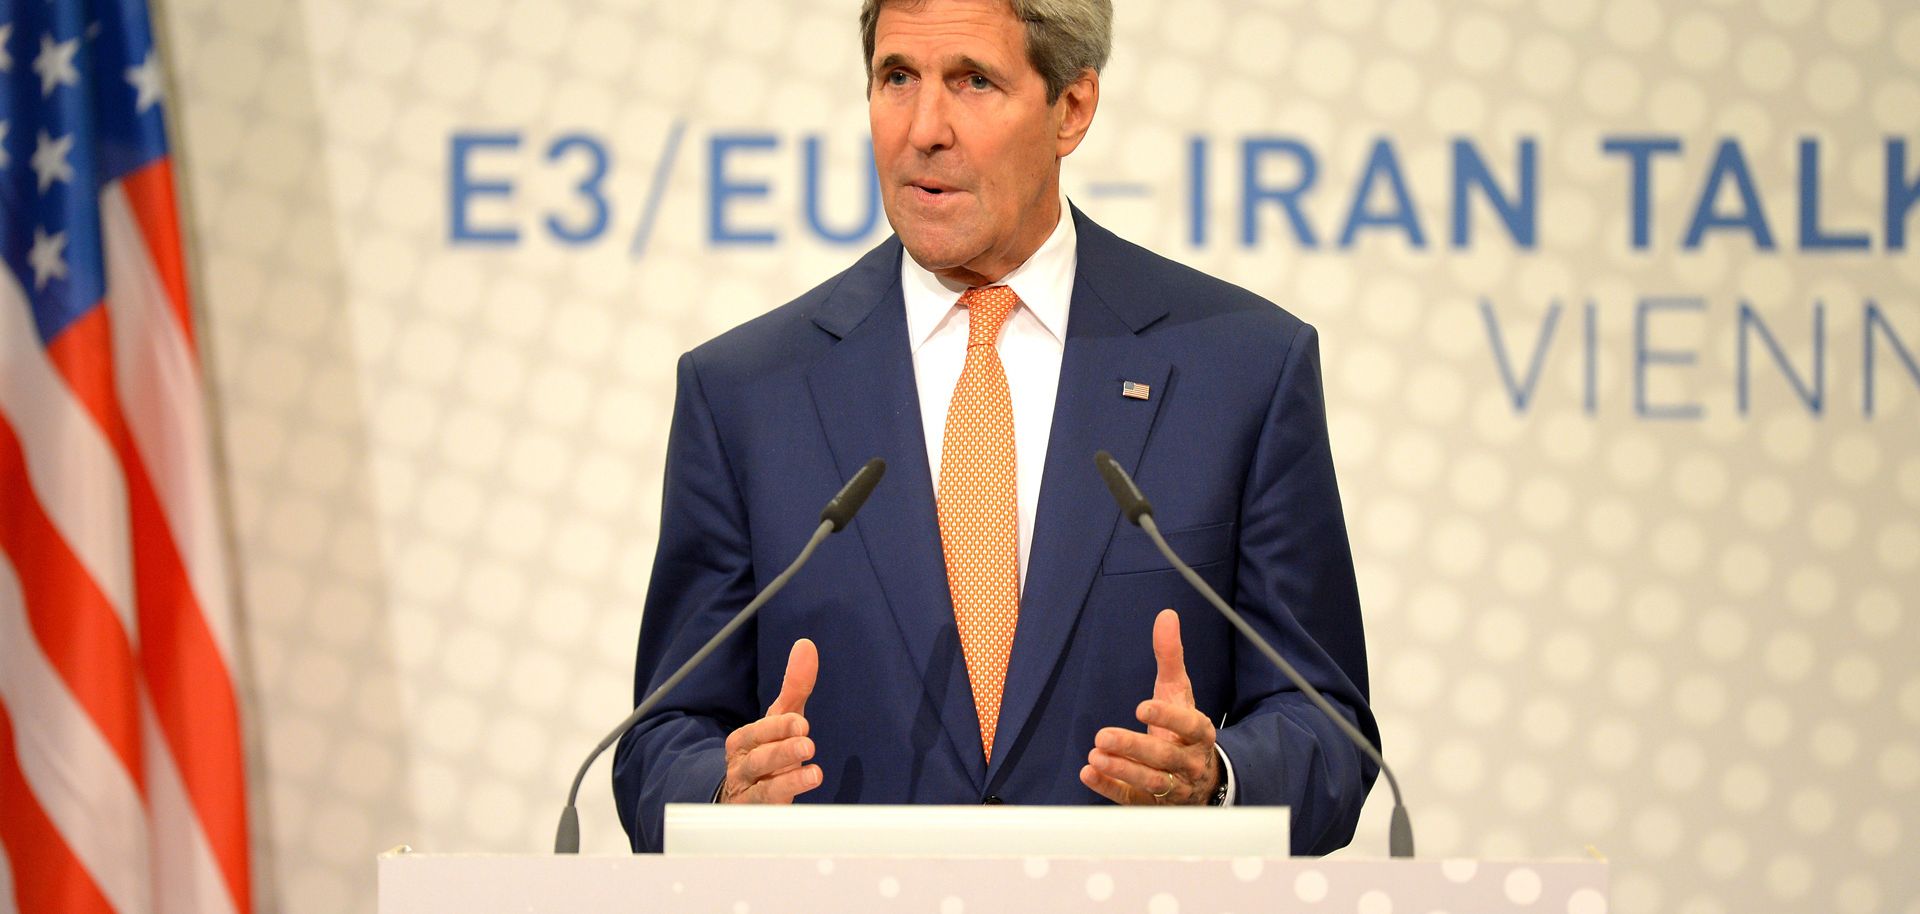 Chronology: The Journey Toward a U.S.-Iran Detente Continues